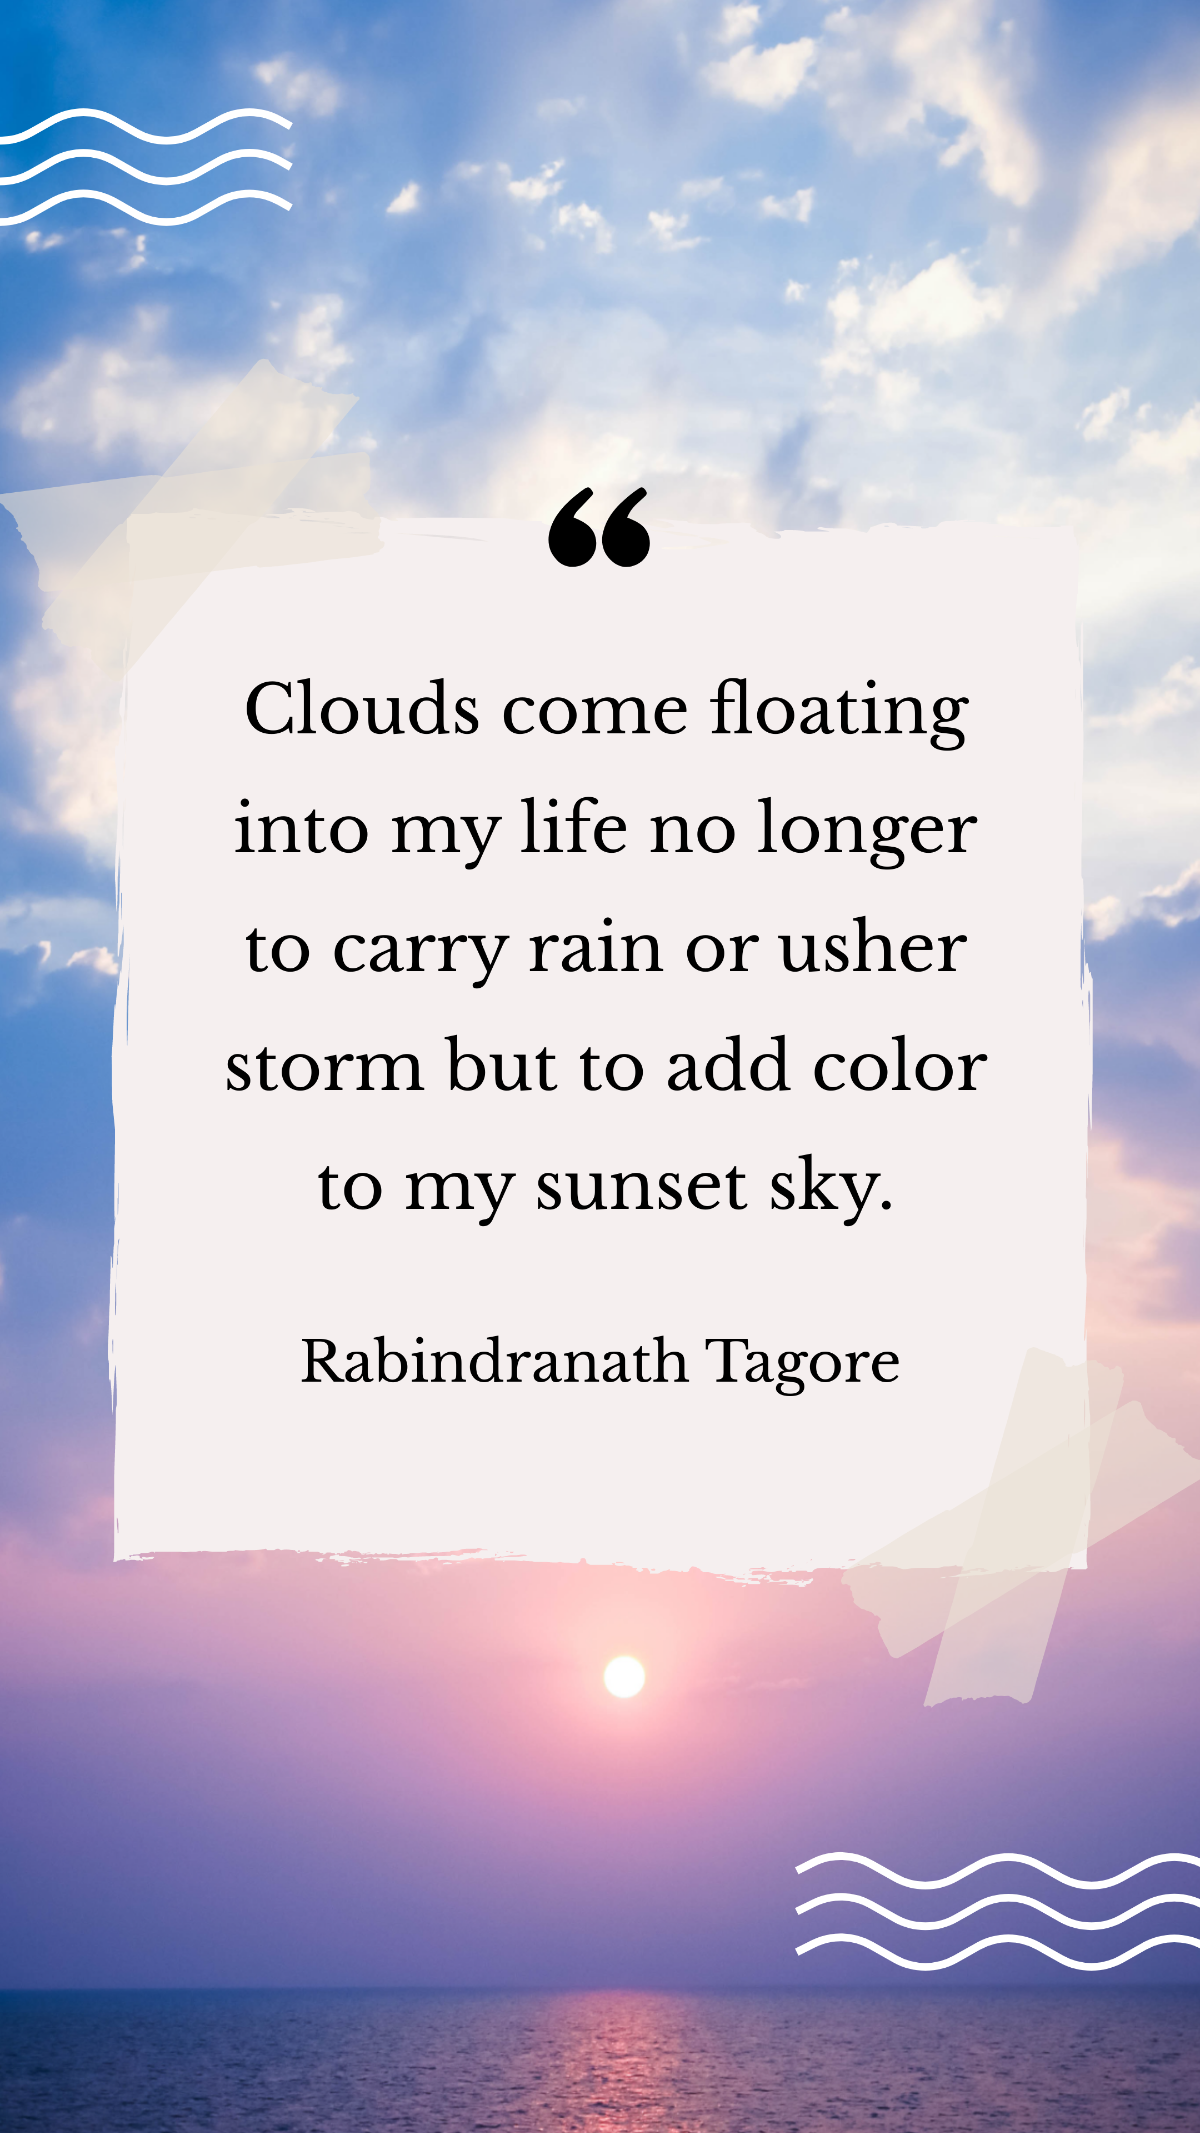 Rabindranath Tagore - Clouds come floating into my life no longer to carry rain or usher storm but to add color to my sunset sky. Template